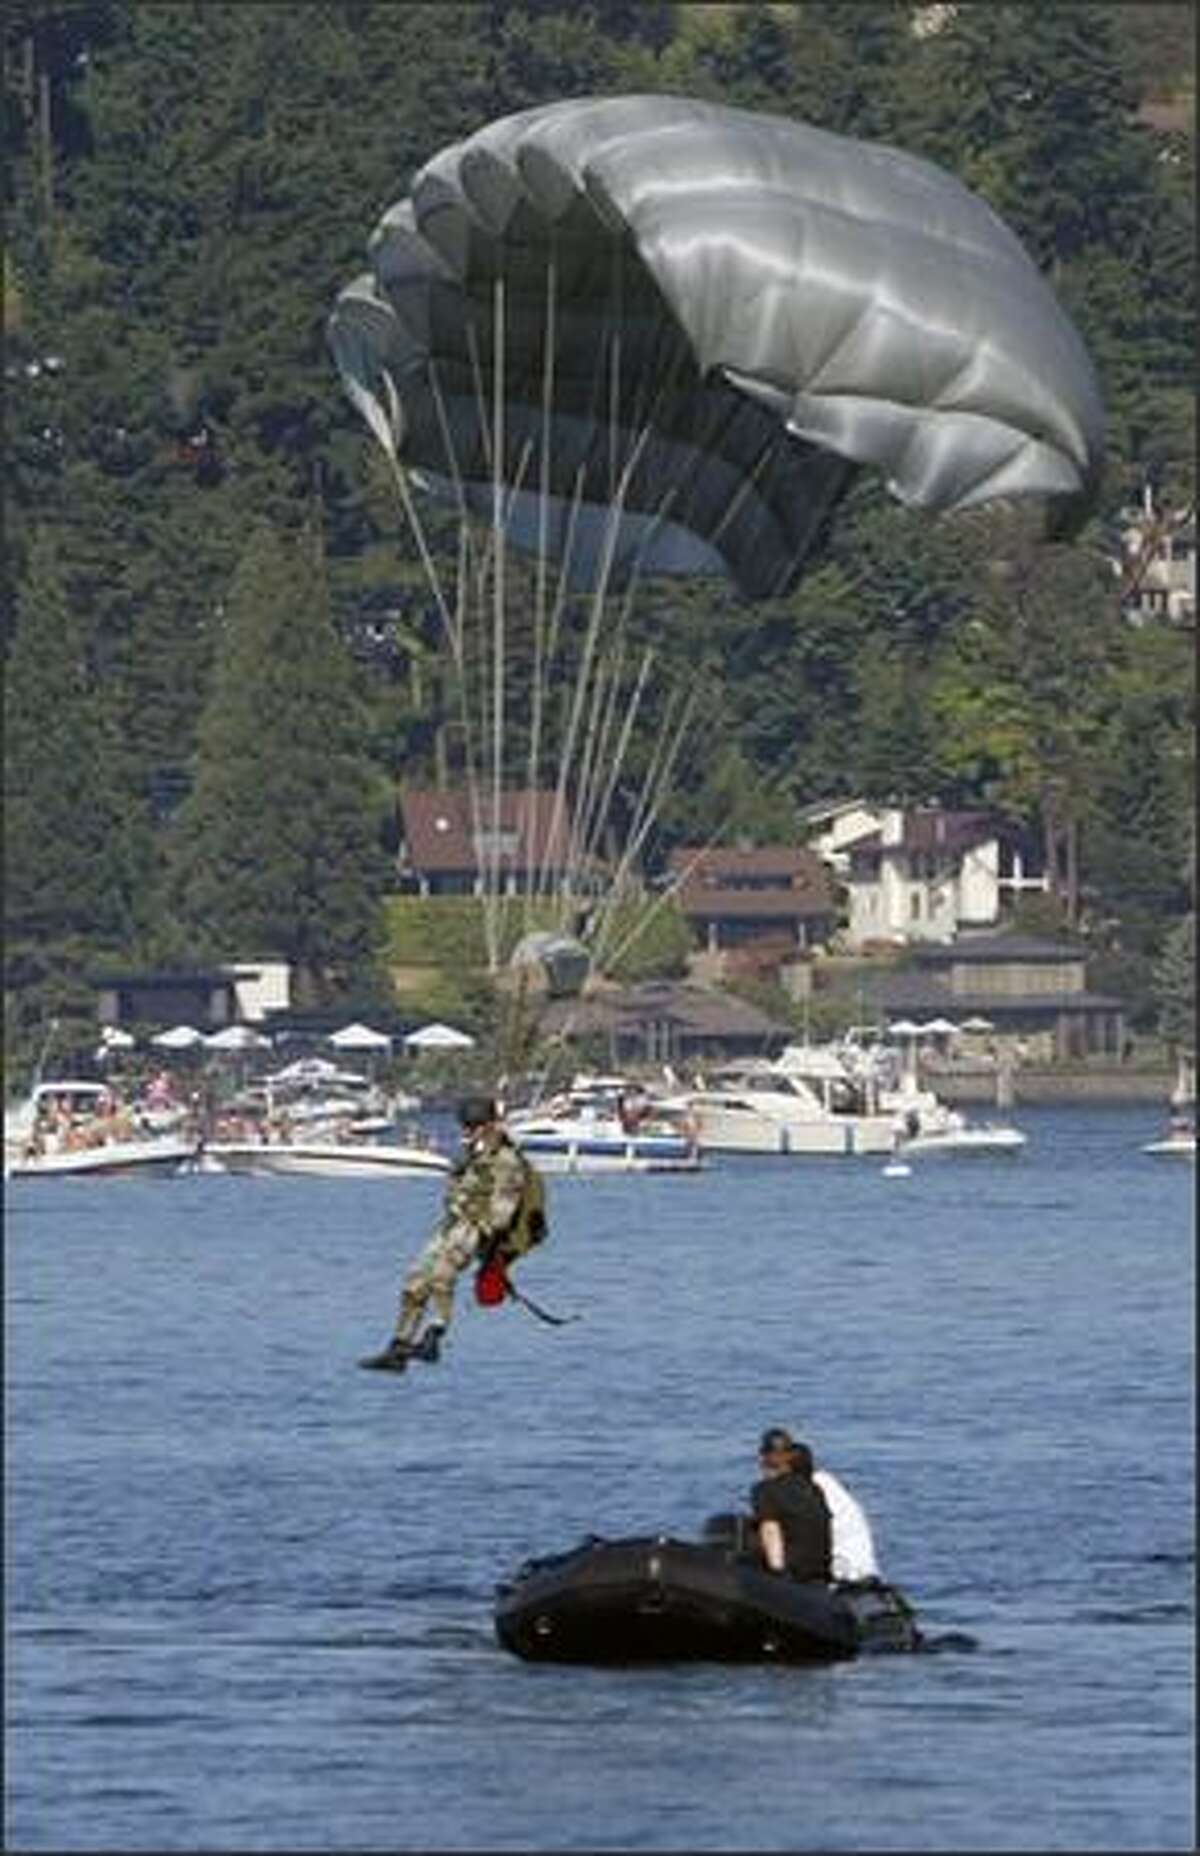 A U.S. Air Force combat controller makes a water landing after jumping from a transport plane over Lake Washington.